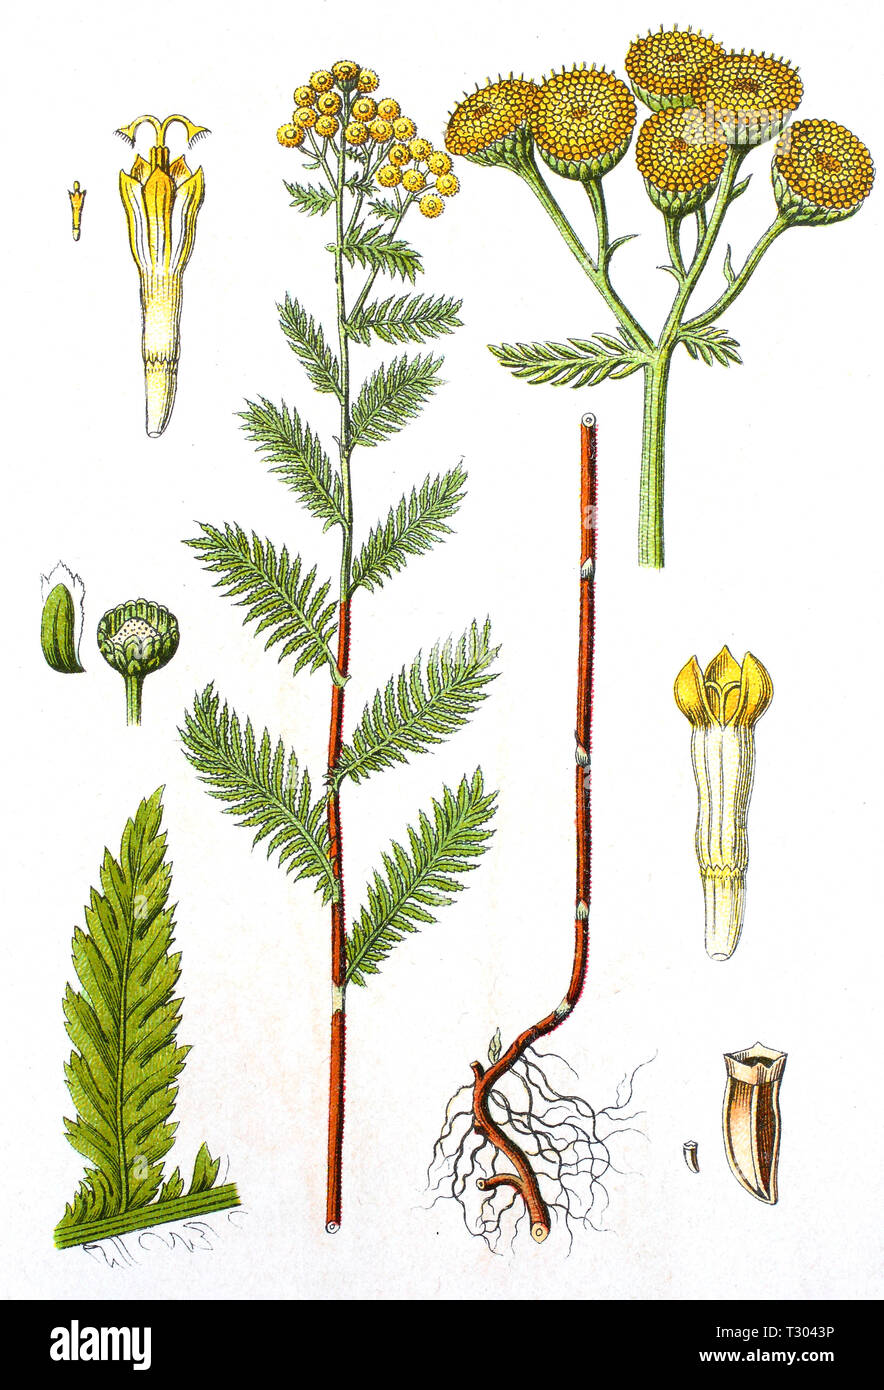 Digital improved reproduction of an illustration of, Rainfarn, Tanacetum vulgare, Tansy, from an original print of the 19th century Stock Photo